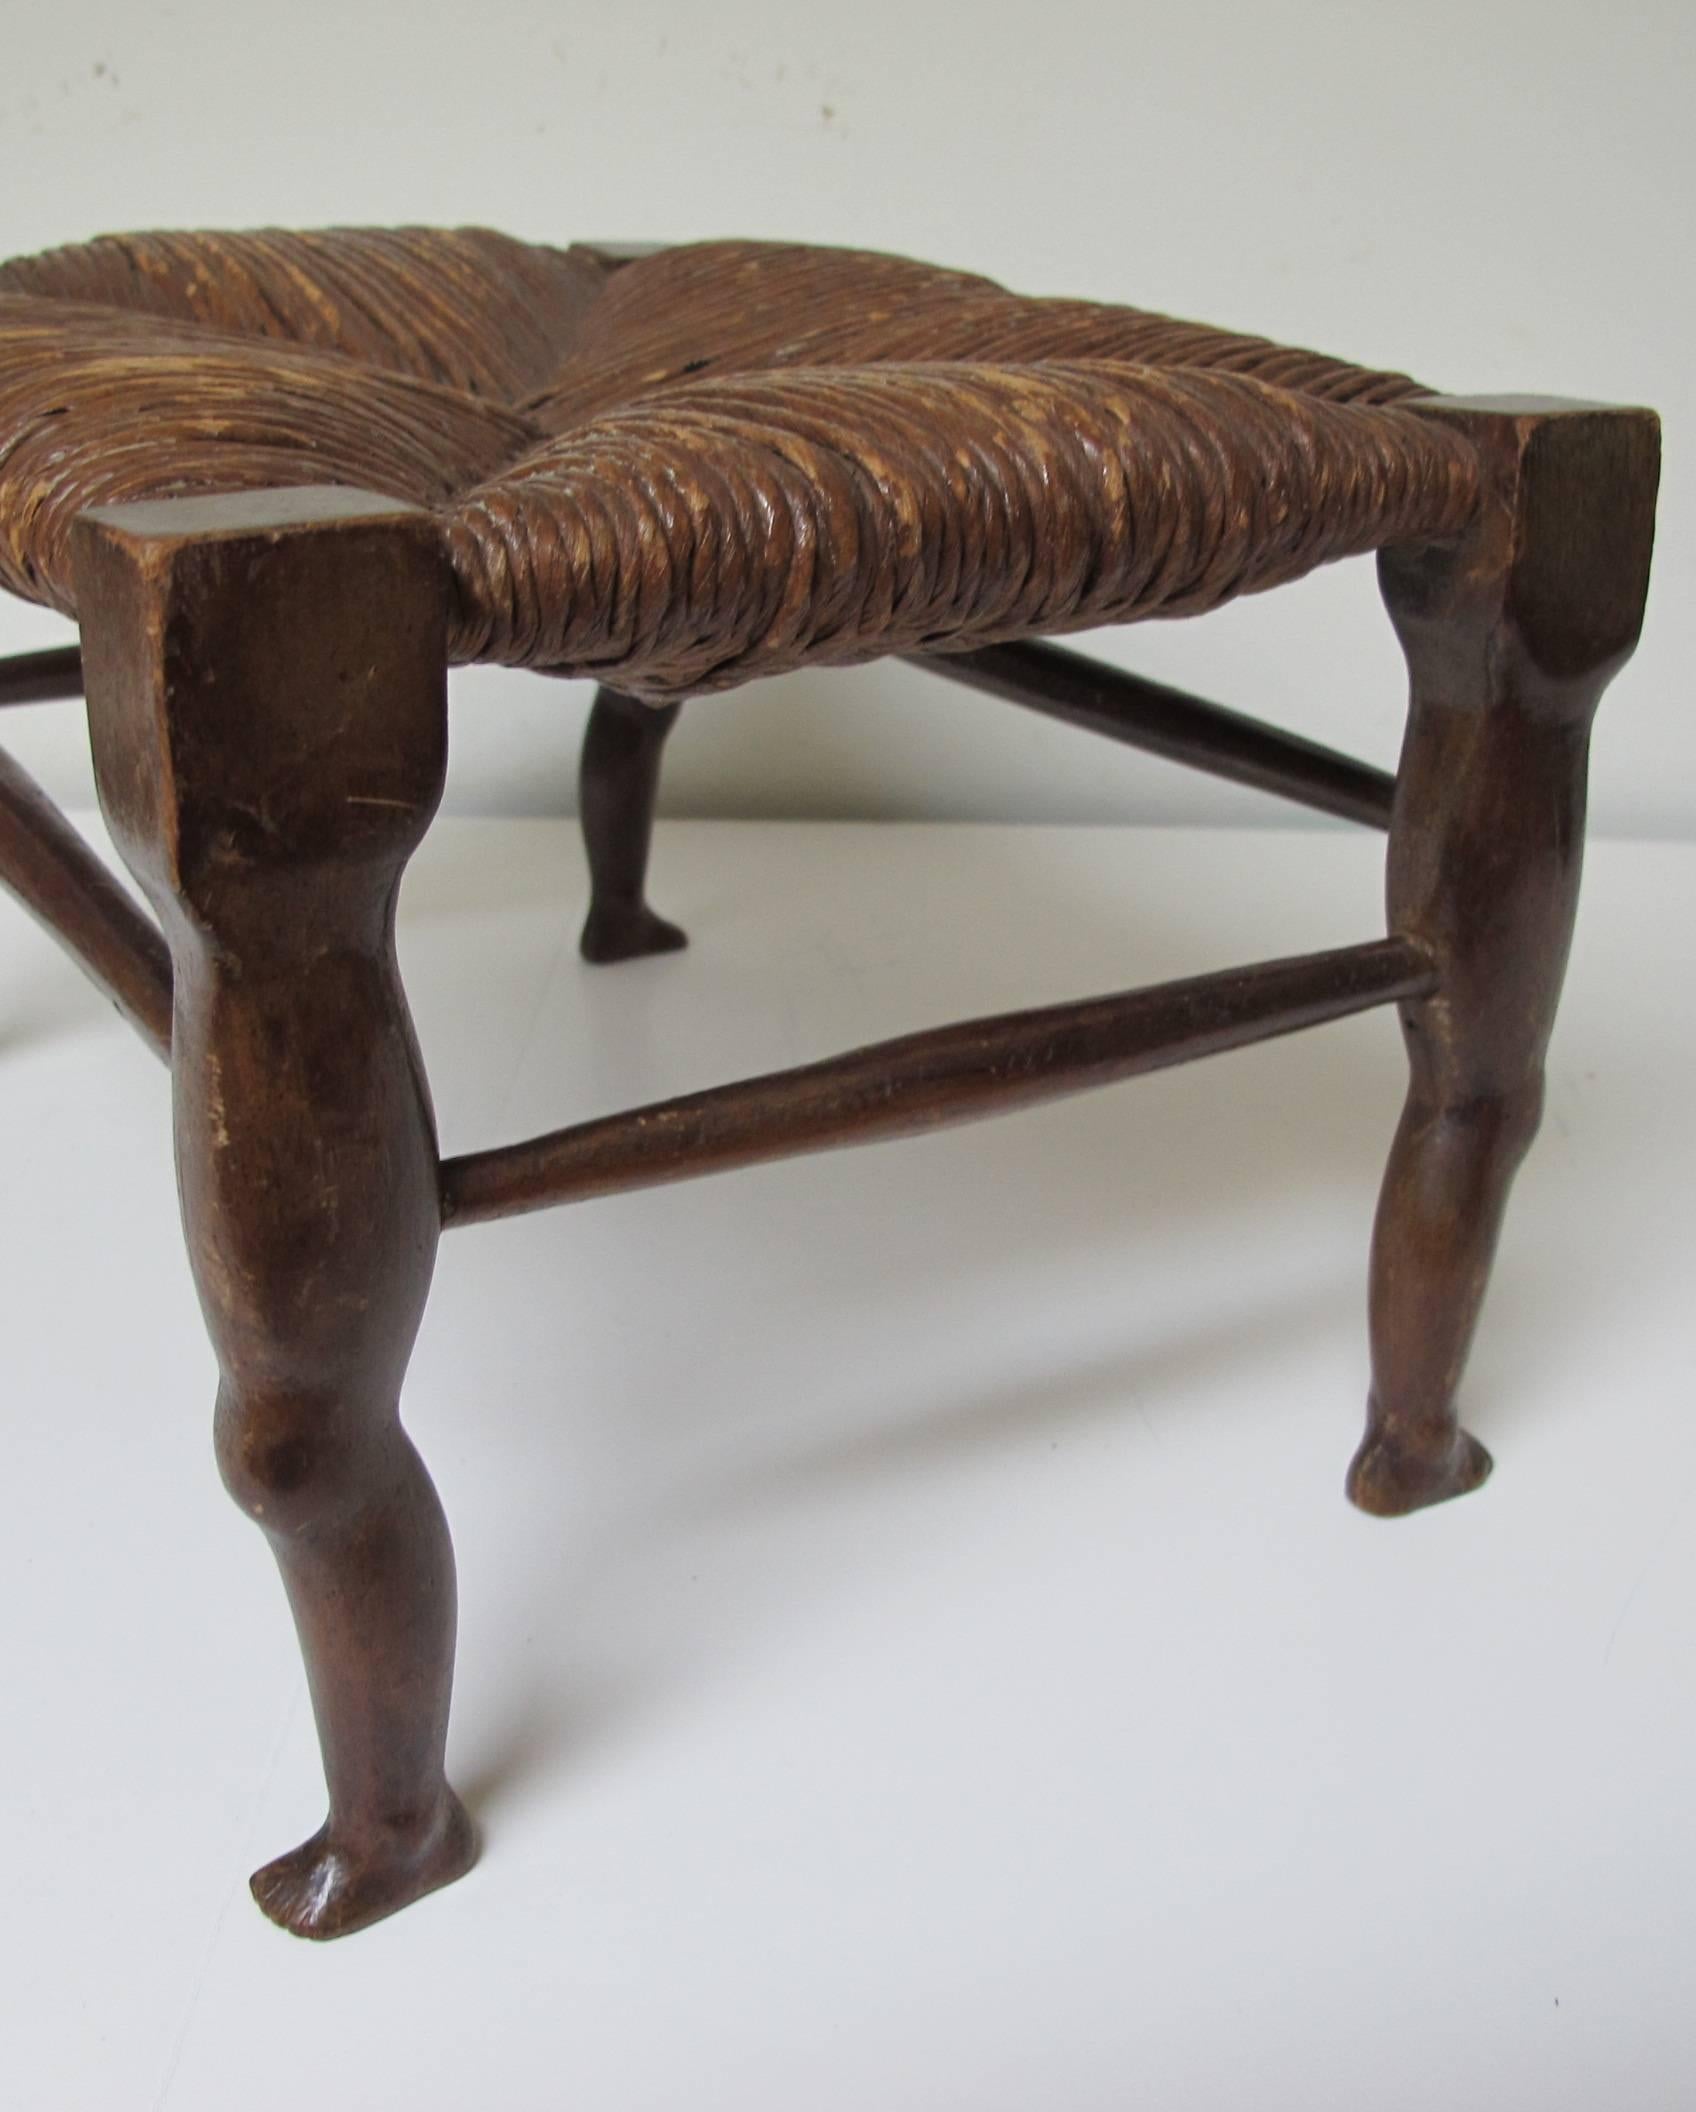 Finely carved small stool with shapely legs and original rush seat. The stool is cat sized for sleeping on and carved and mortised mahogany with stained nut brown finish.
Being a leg man this folk piece was irresistible.